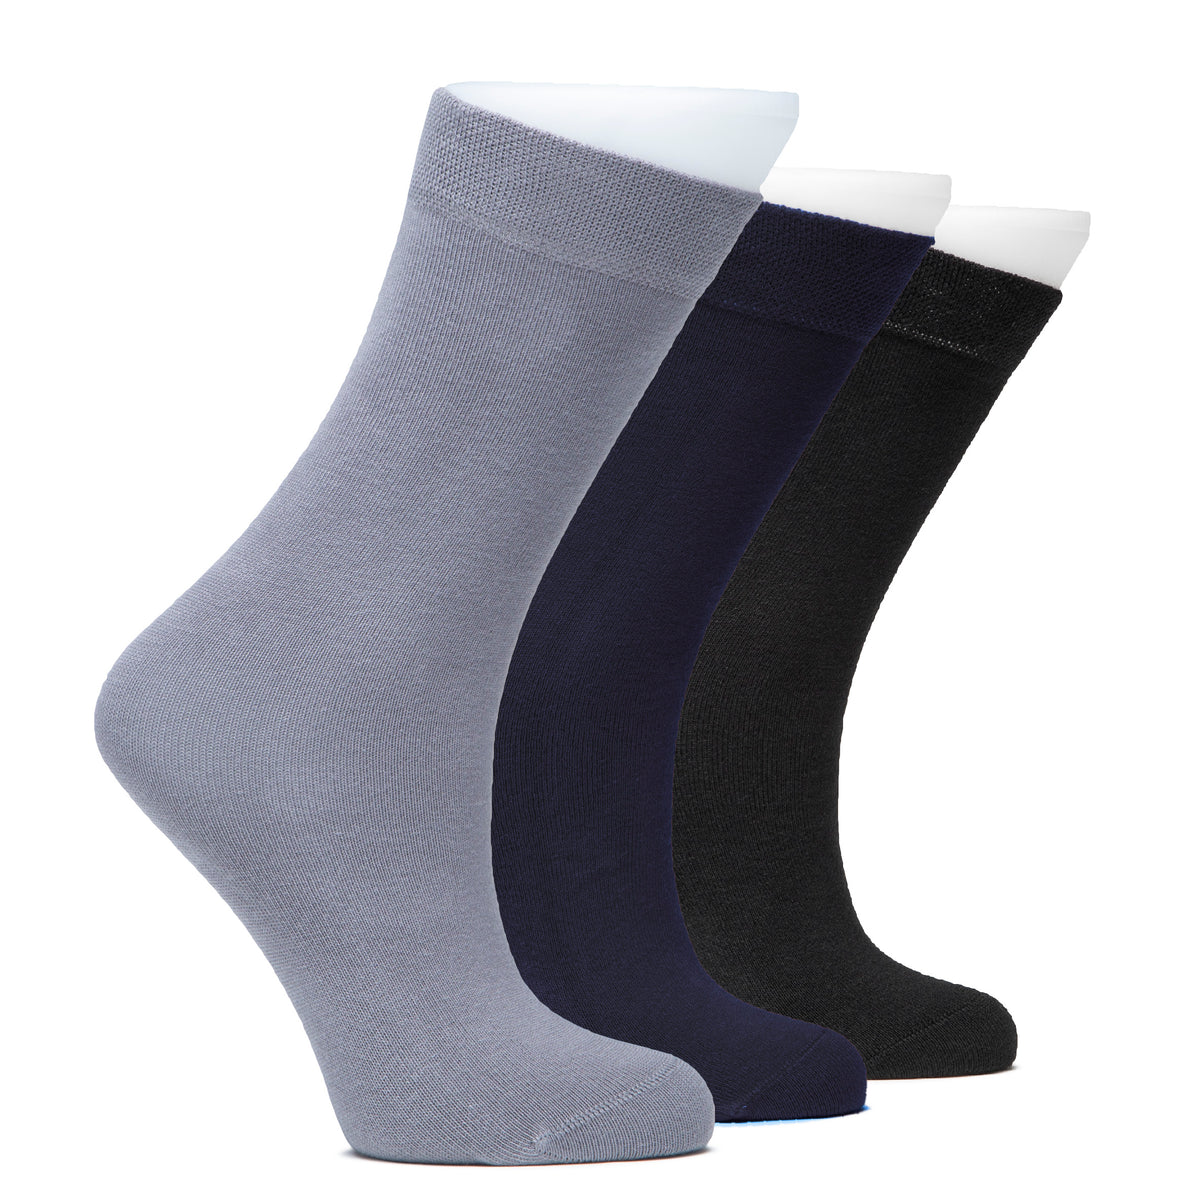 Outstanding Compact Cotton Seamless Toe Plain Color School Socks For Kids, 3 Pairs | 3-5 Years | Grey / Navy / Black